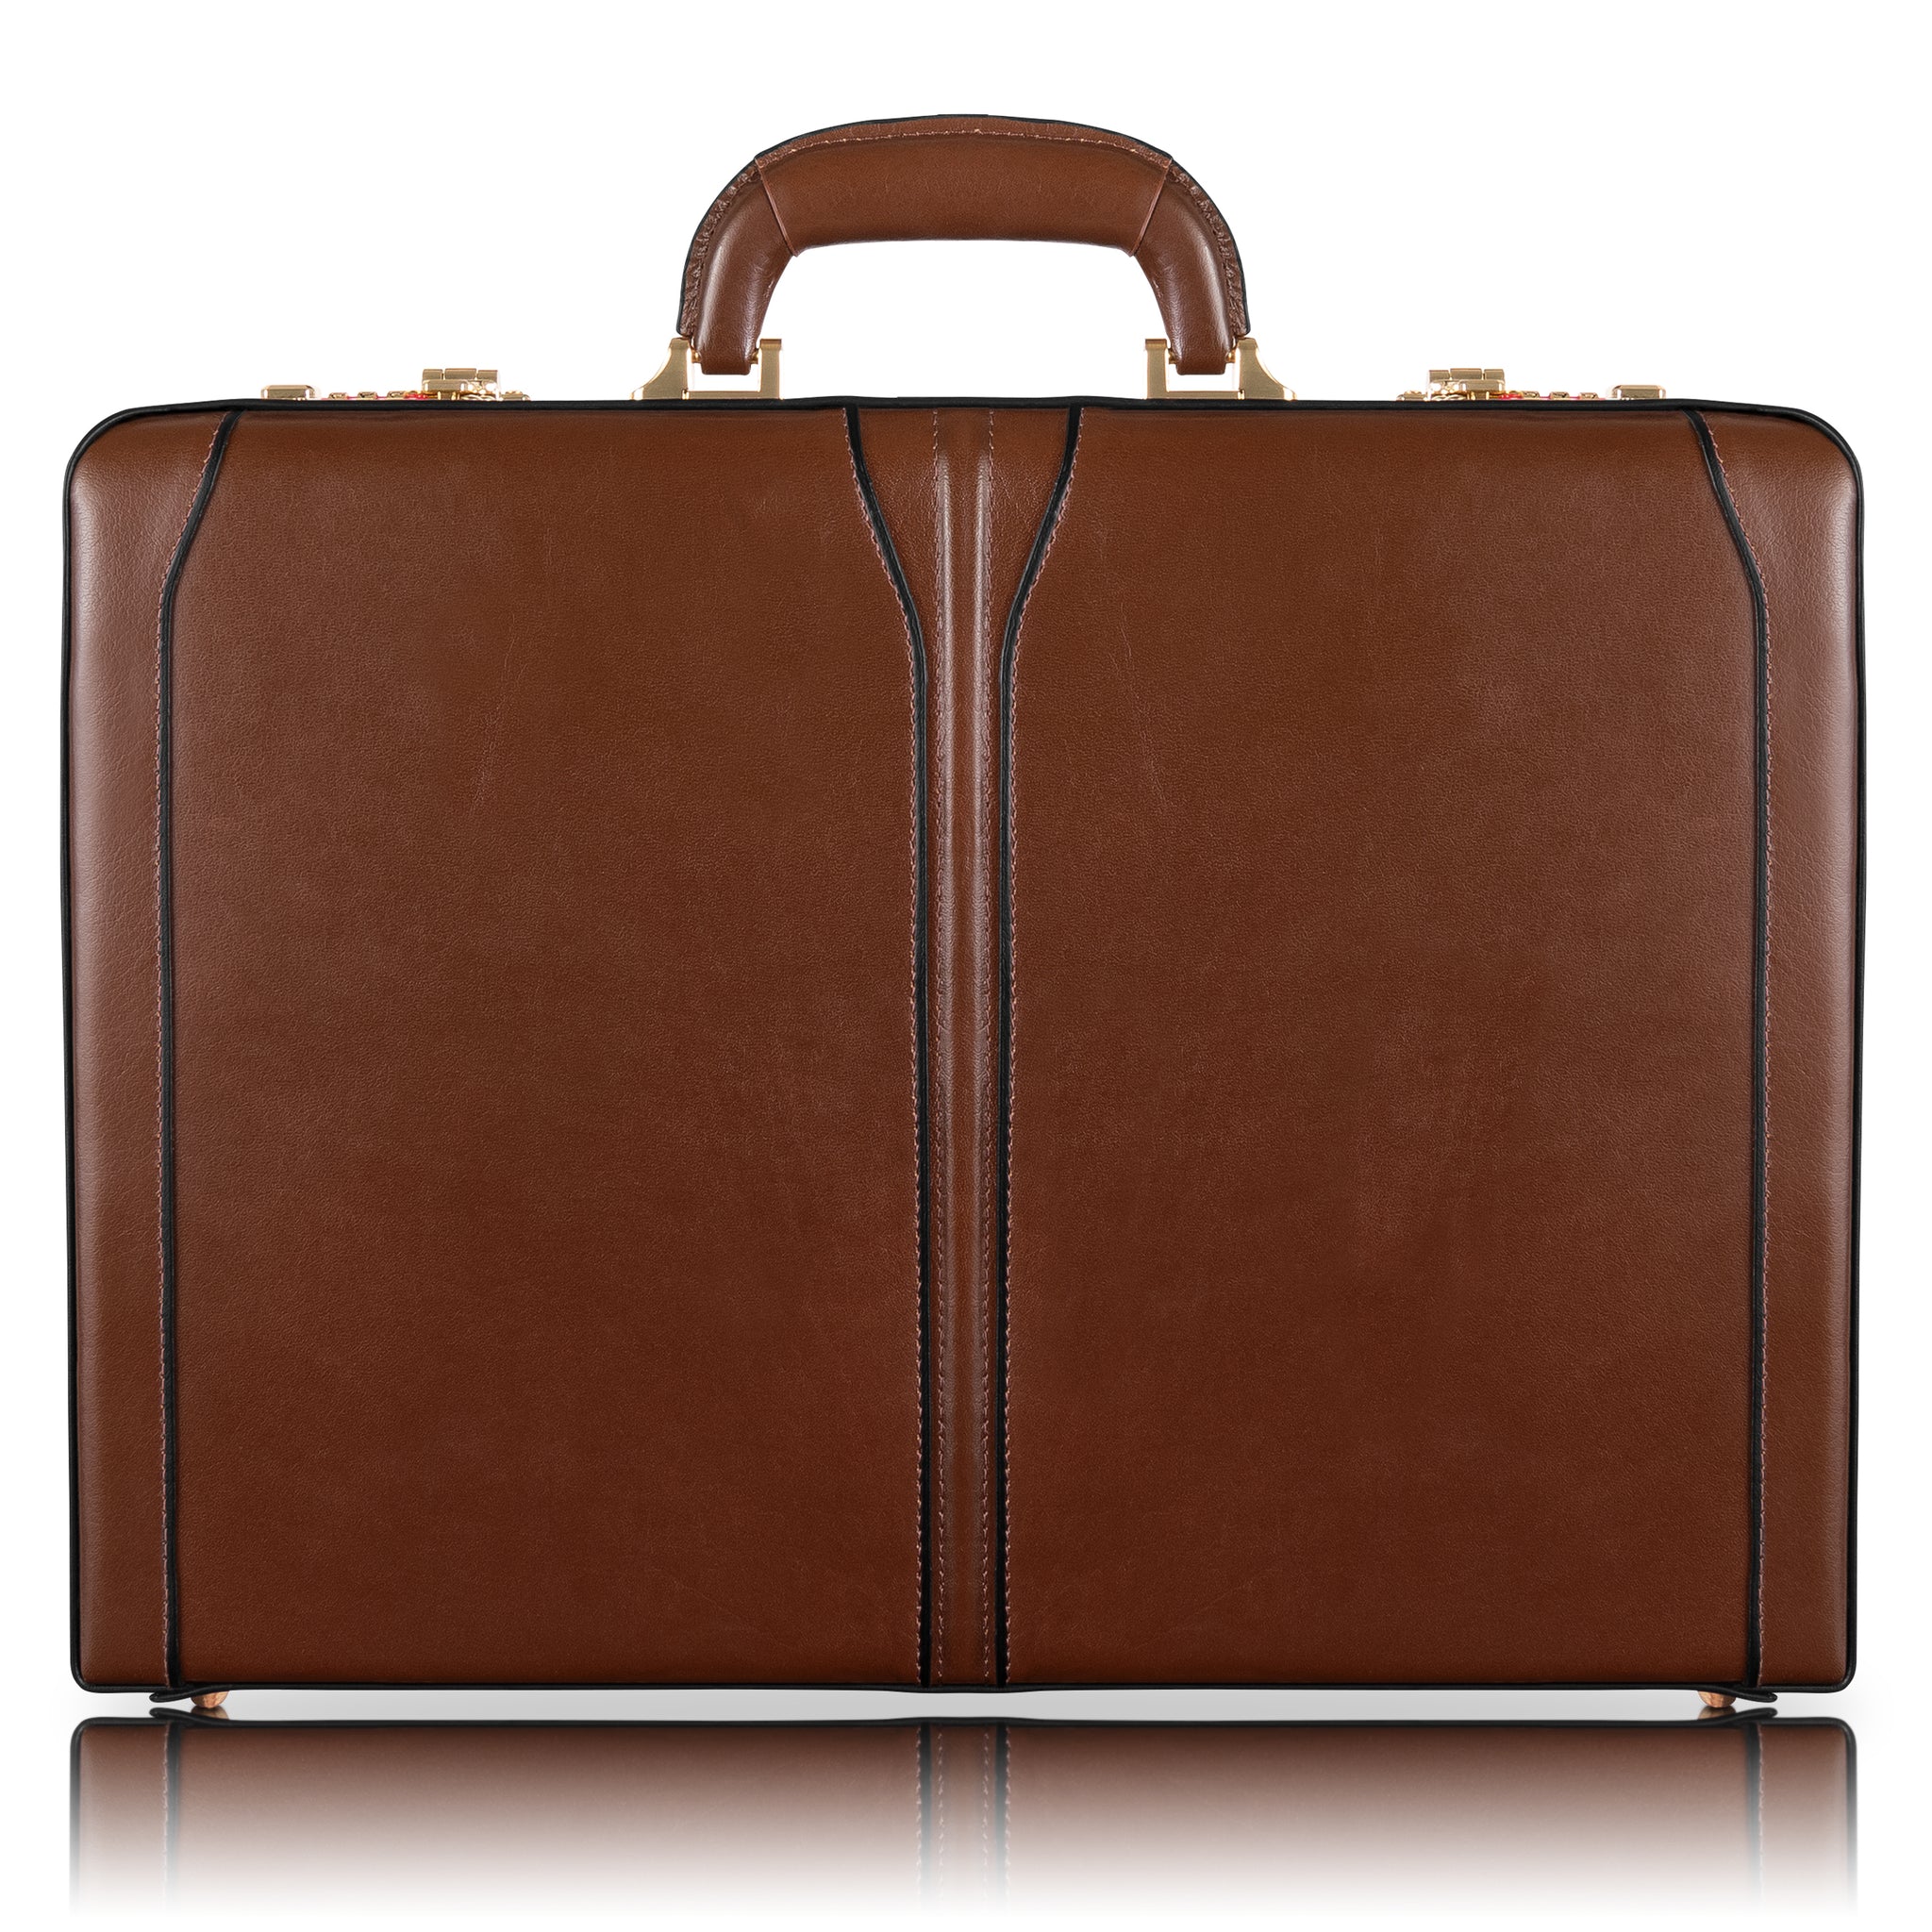 Lawson Brown Leather Briefcase - Front View